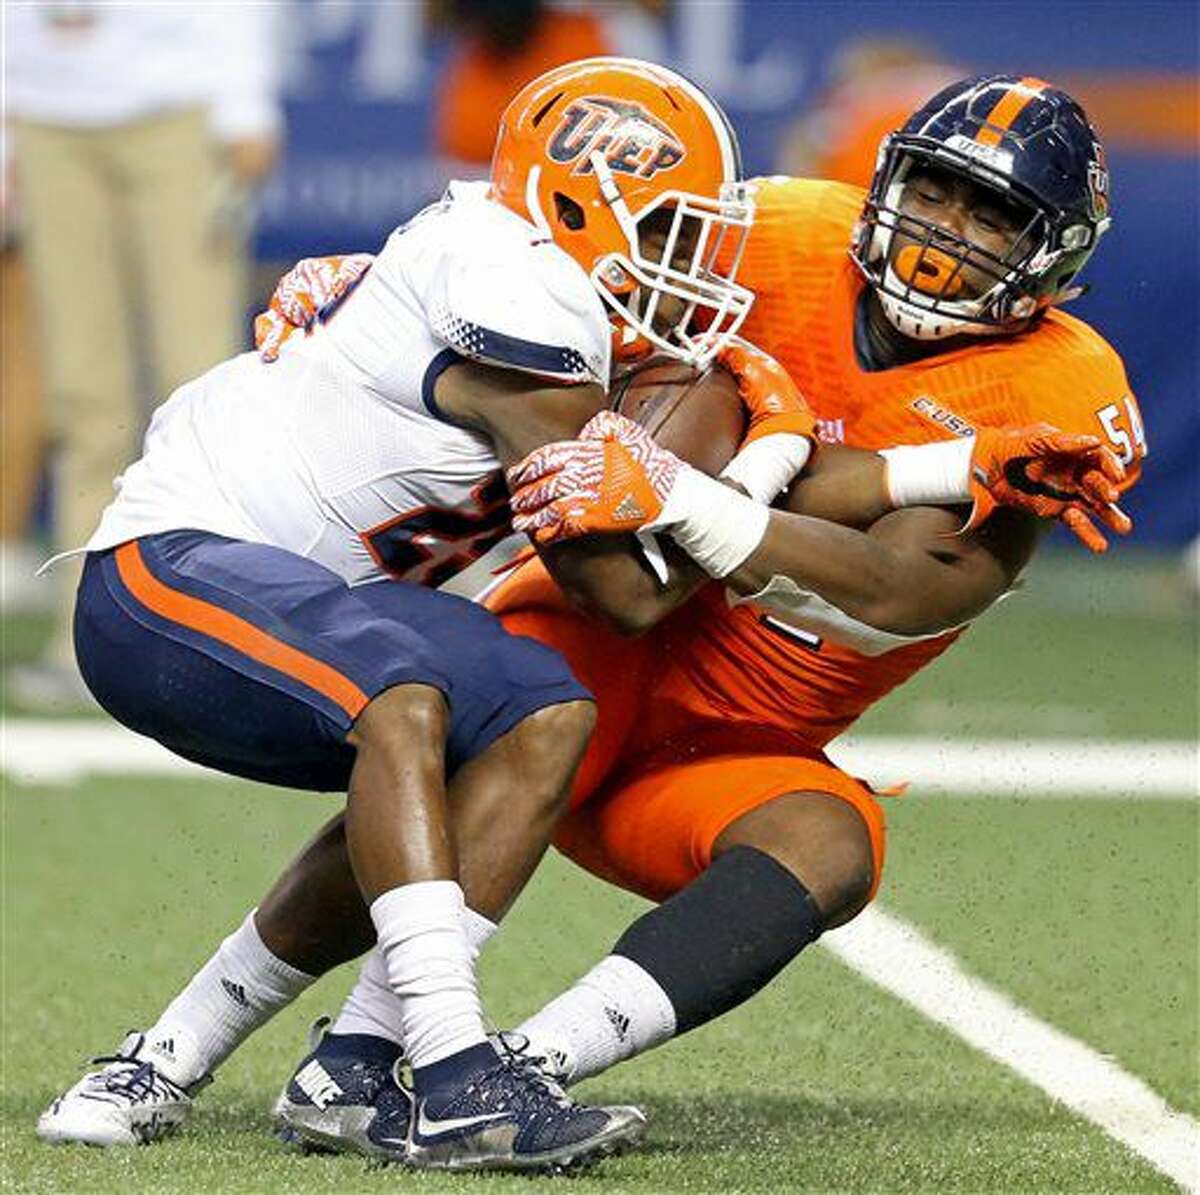 UTEP running back Aaron Jones (29) is tackled by UTSA defensive end Kevin Strong Jr. (54) during the first half of an NCAA college football game, Saturday, Oct. 22, 2016, in San Antonio. (Edward A. Ornelas/San Antonio Express-News via AP)